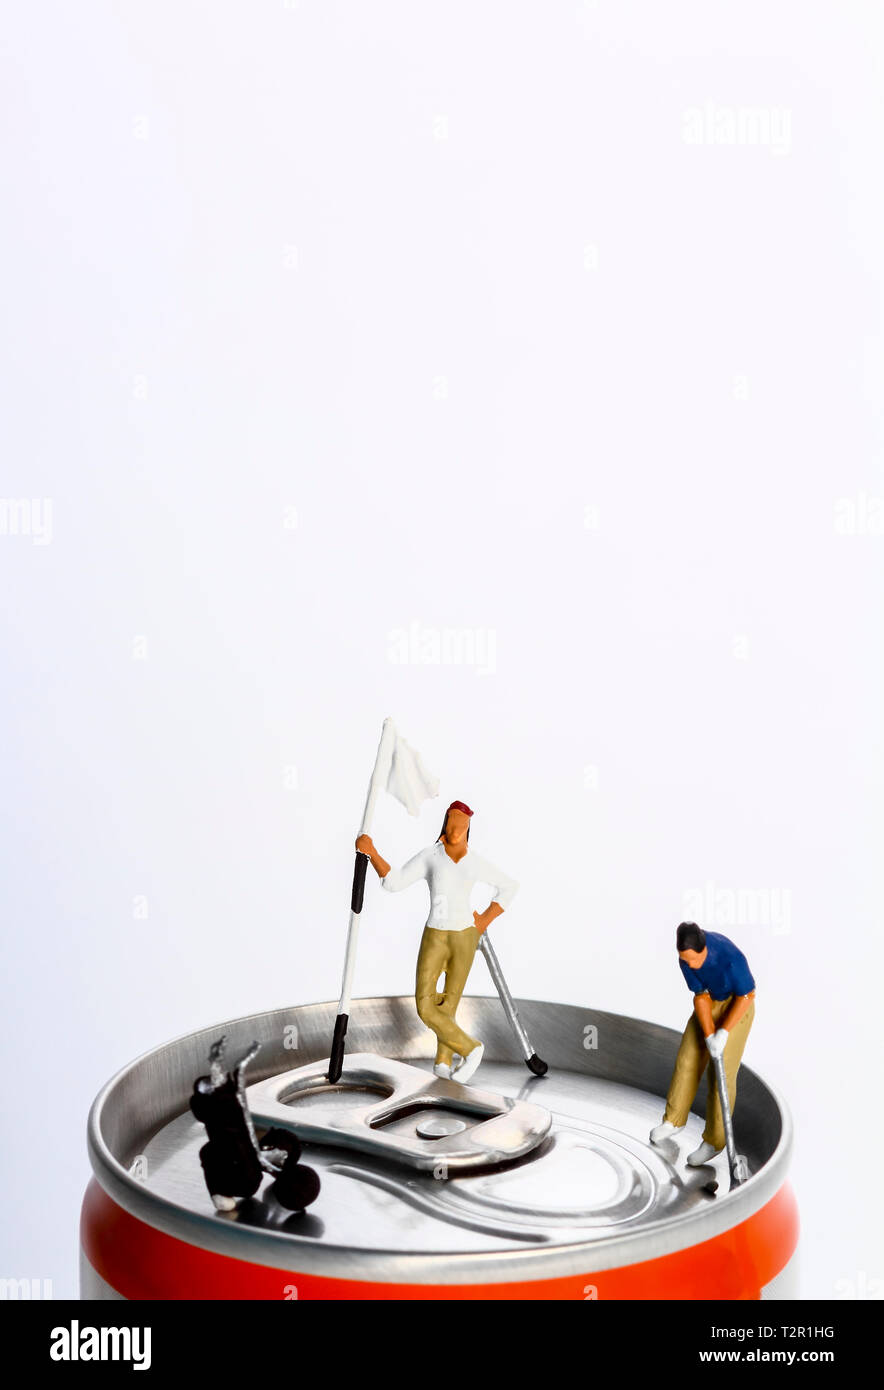 Conceptual diorama image of miniature figures playing golf on the top of a drinks can Stock Photo